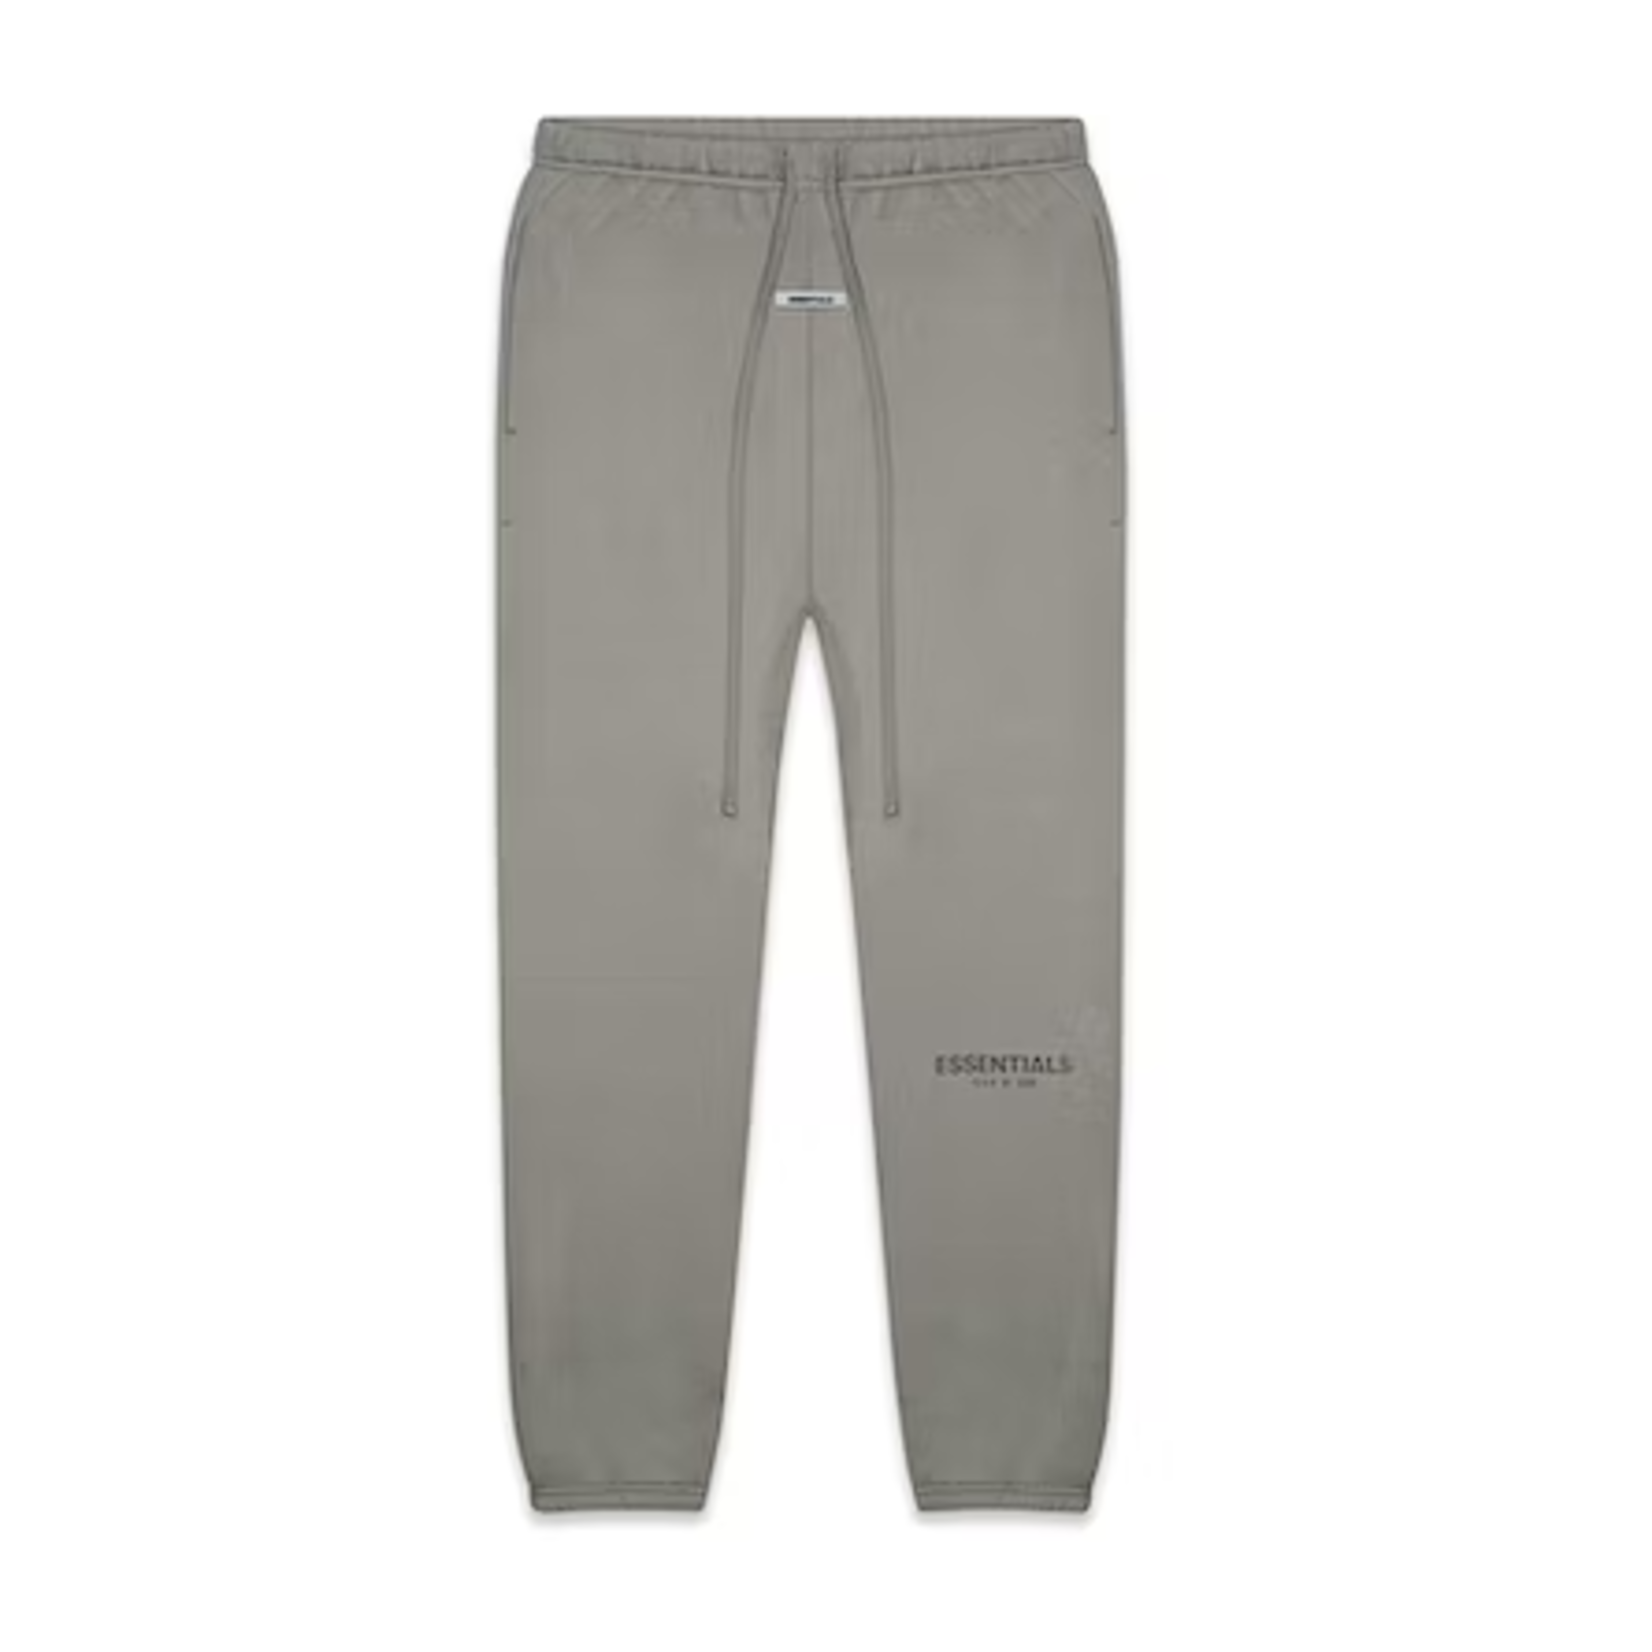 Fear Fear of God Essentials Sweatpants Cement Size XLarge, DS